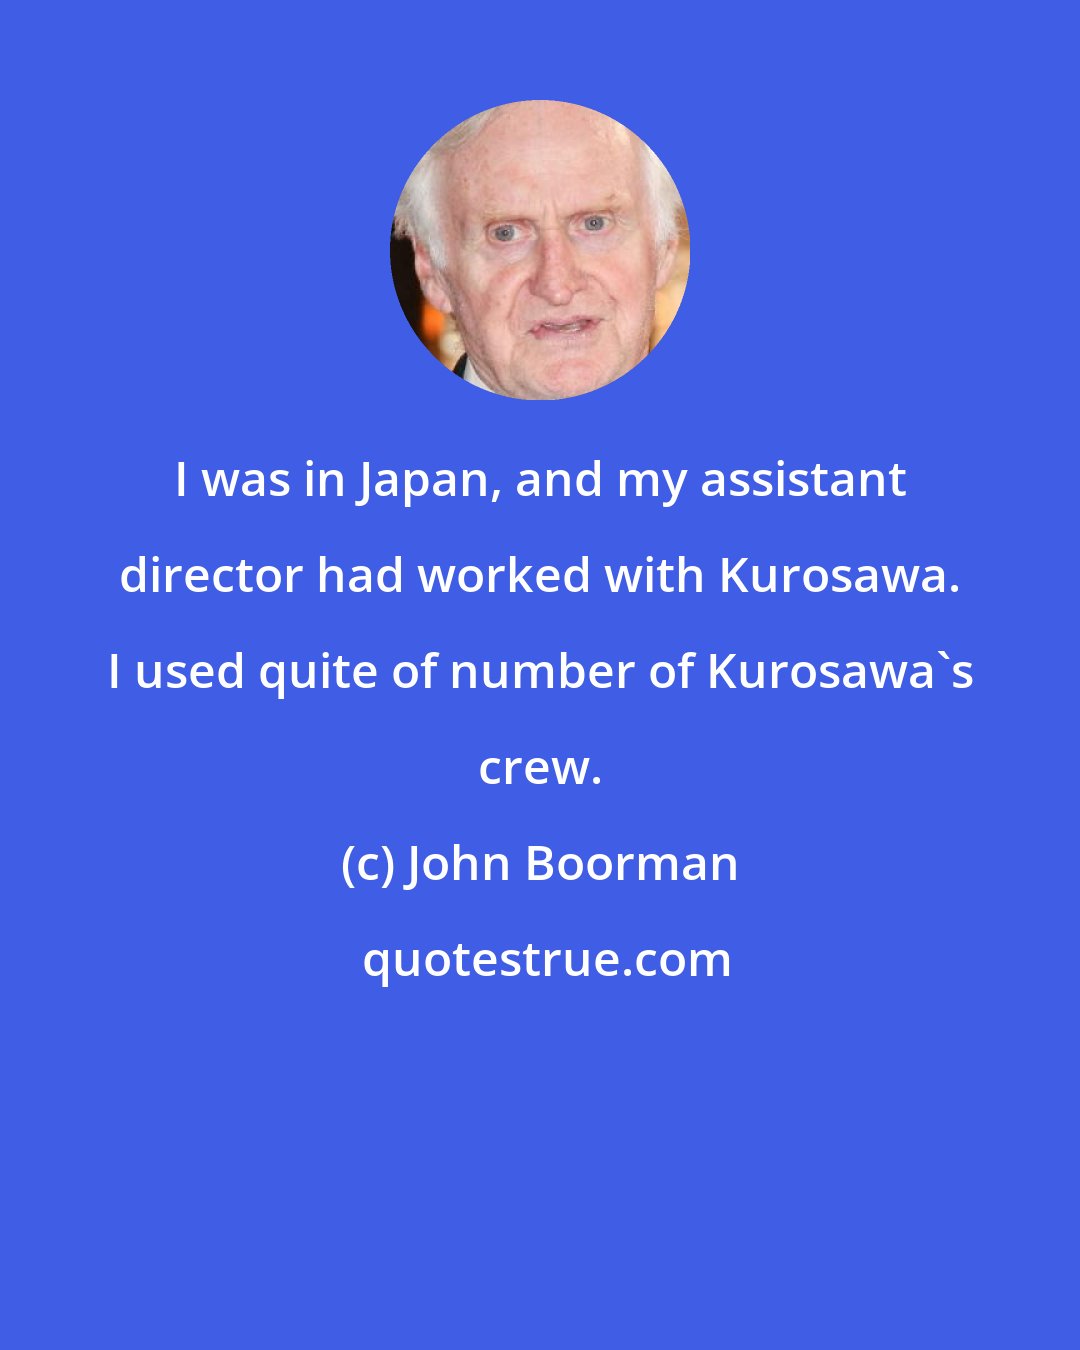 John Boorman: I was in Japan, and my assistant director had worked with Kurosawa. I used quite of number of Kurosawa's crew.